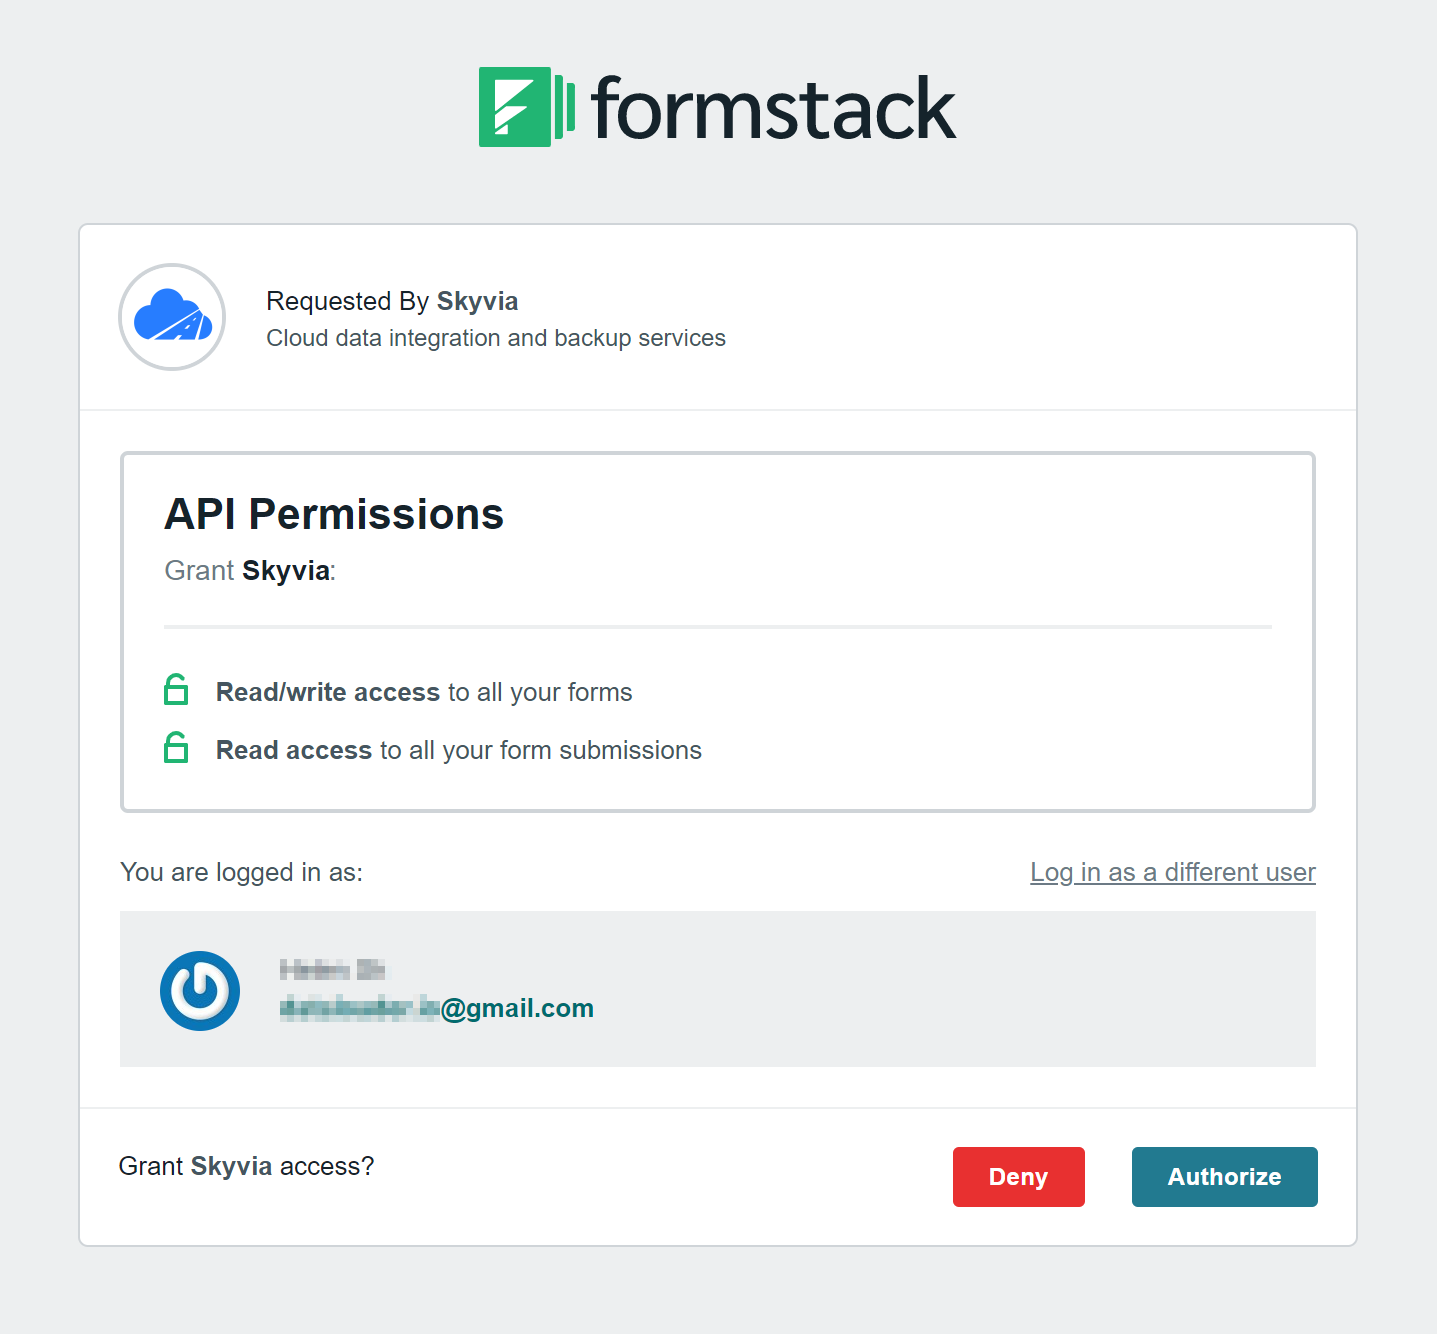 Granting access to Formstack